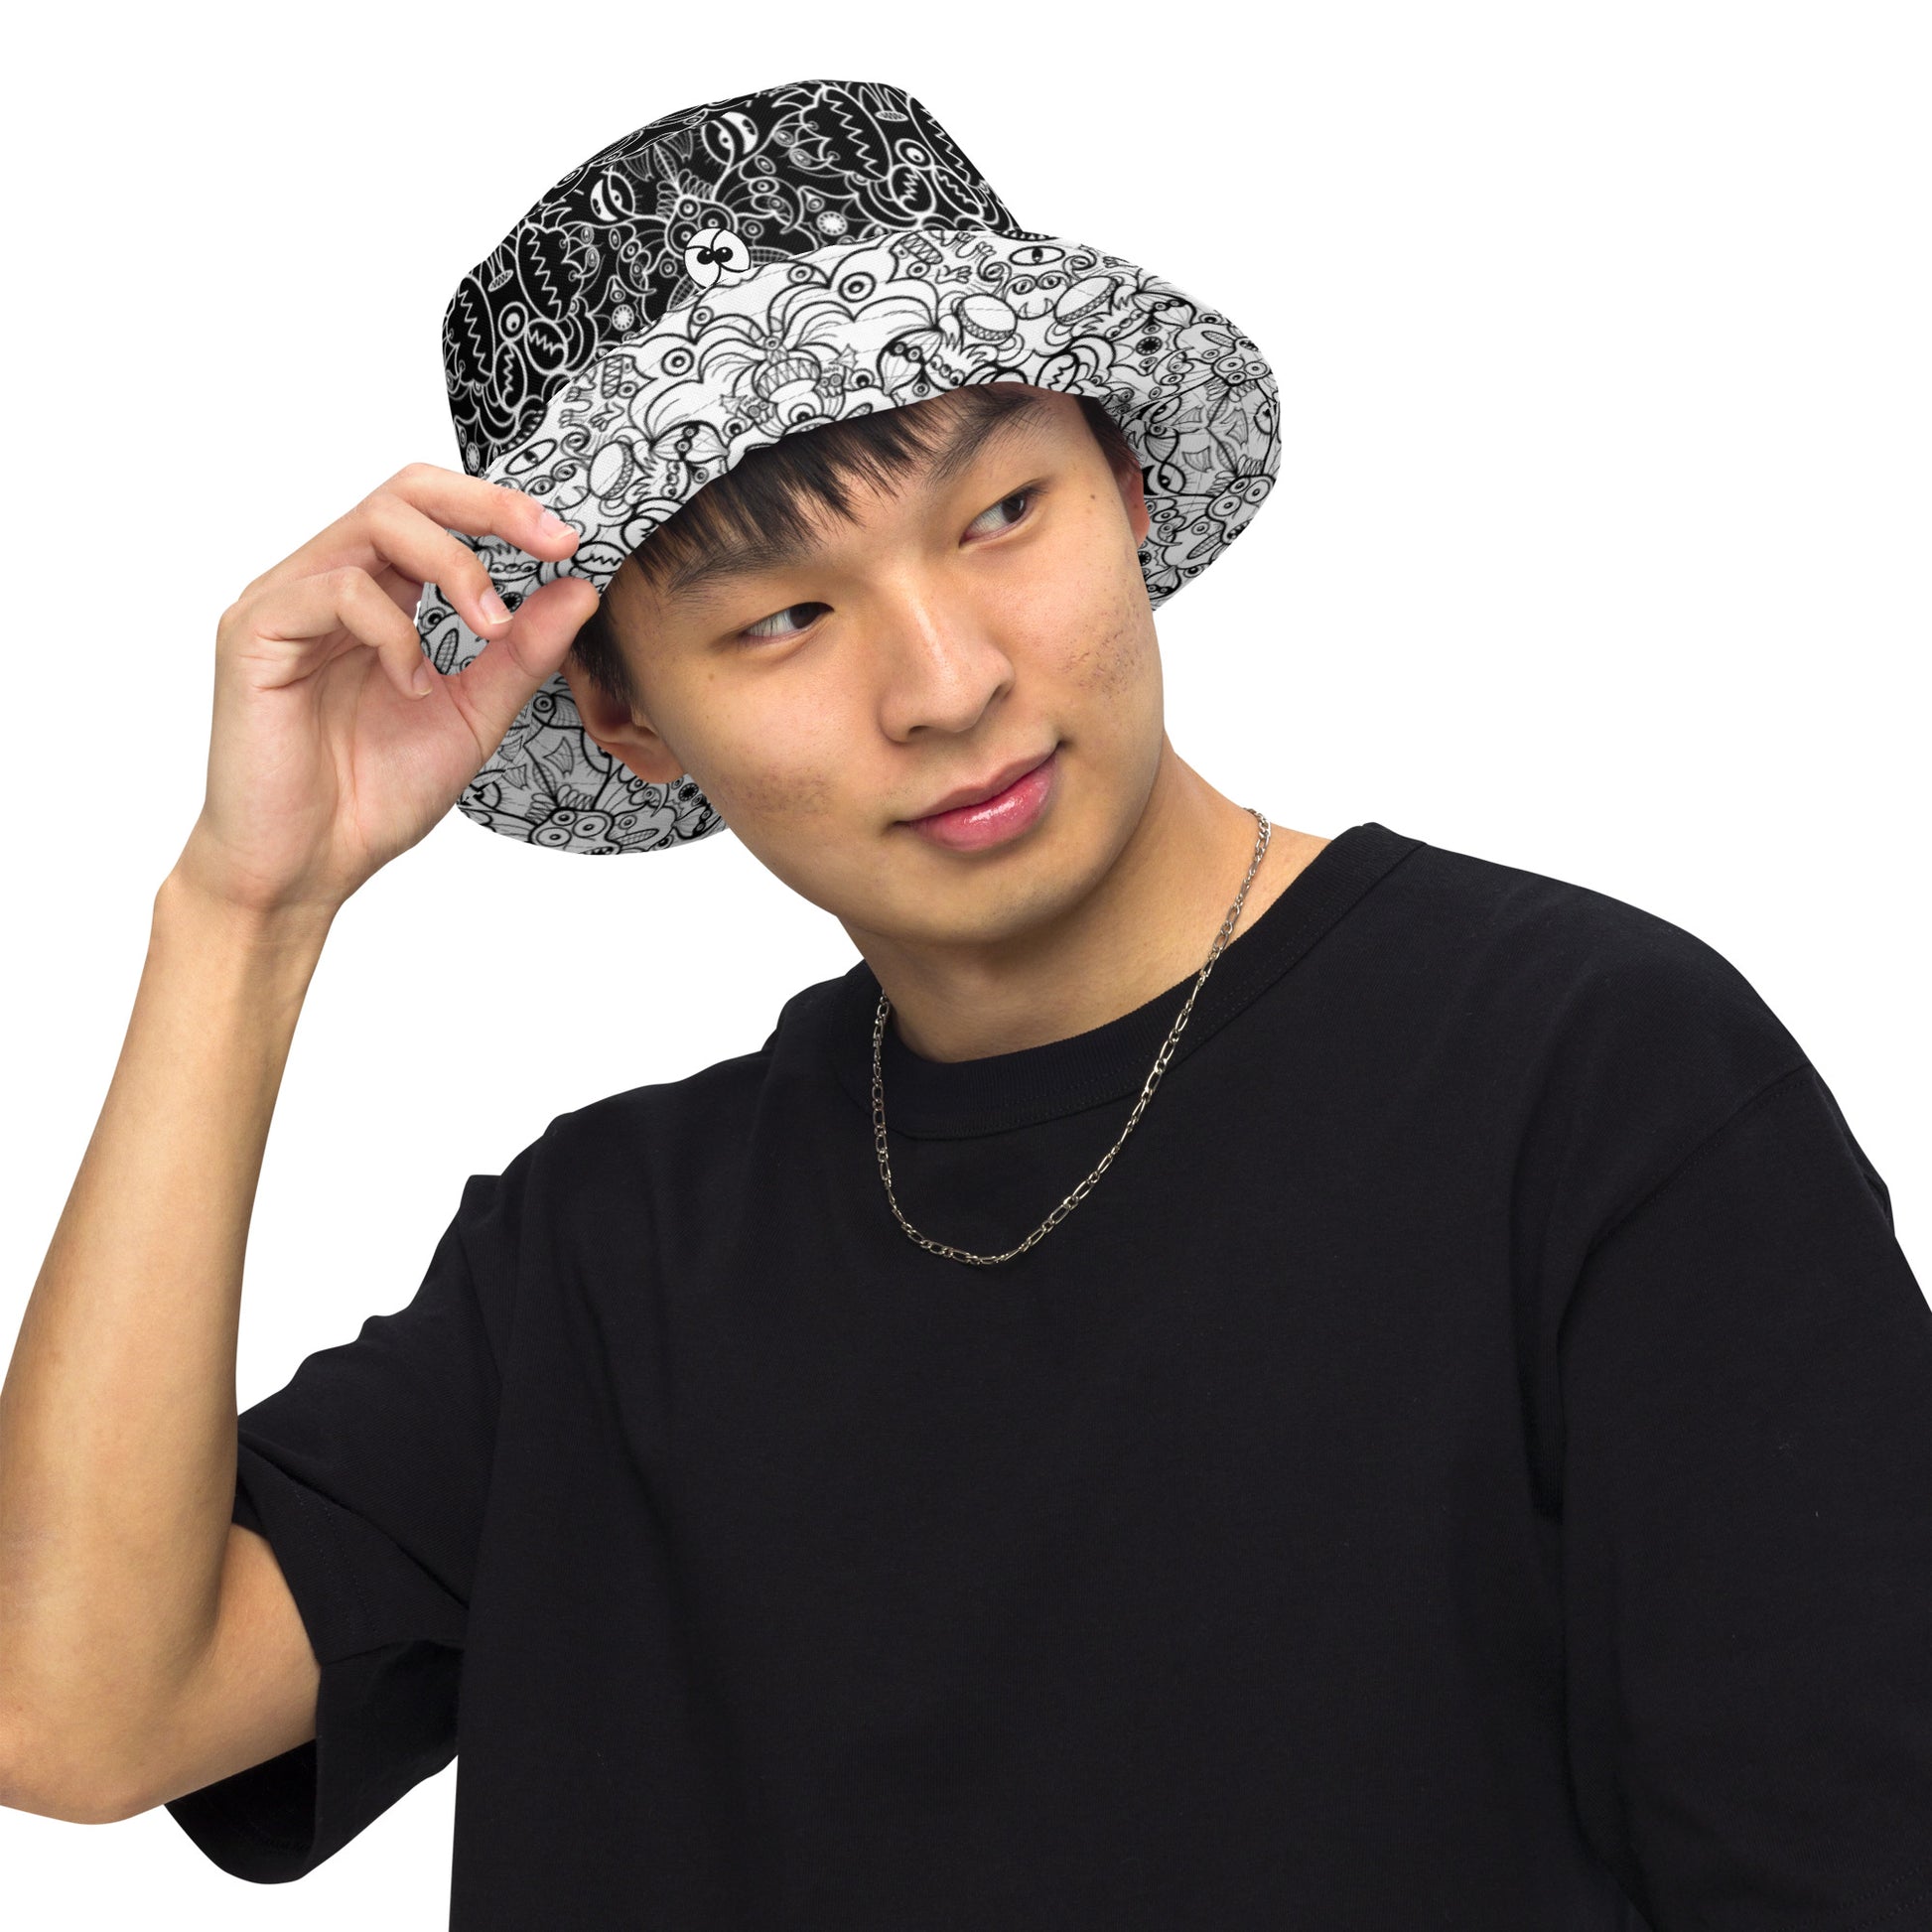 The powerful dark side of the doodle world Reversible bucket hat – Zoo&co